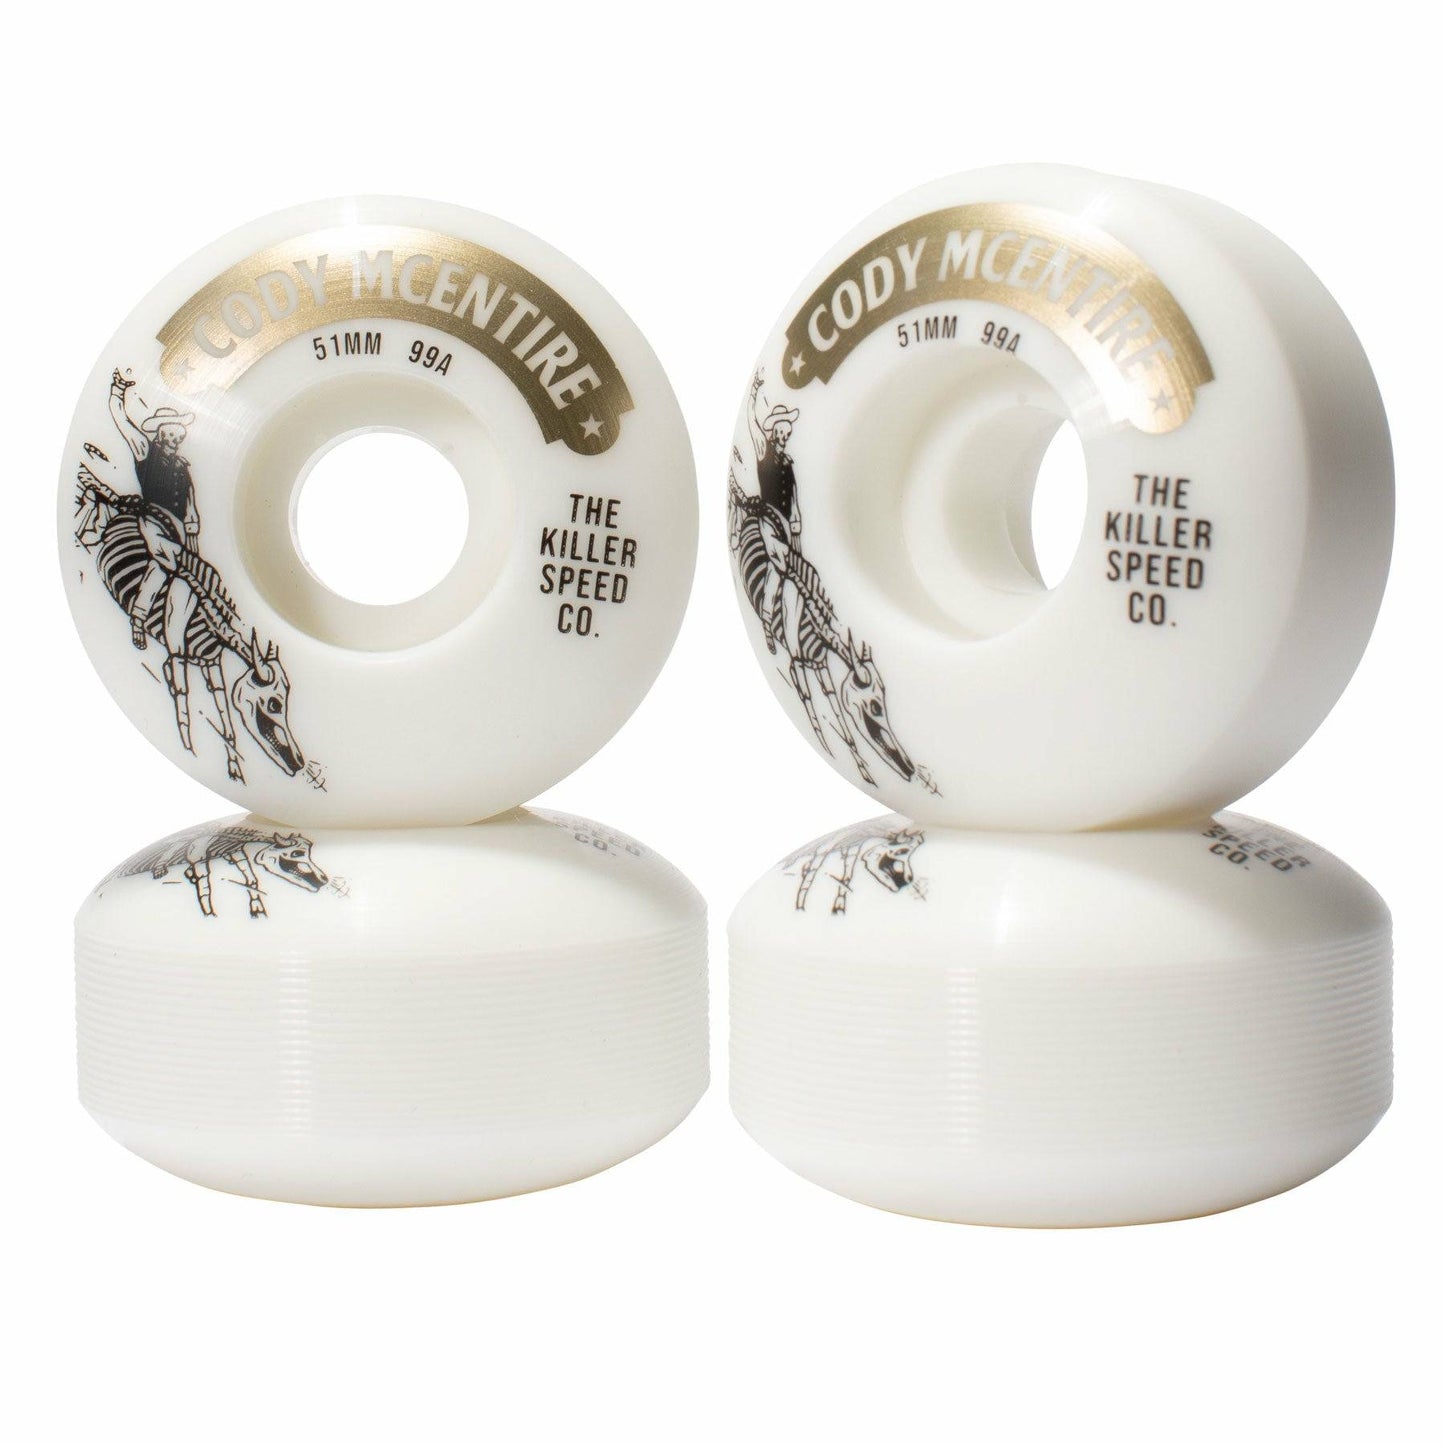 Cody McEntire - Rodeo 51mm 99a